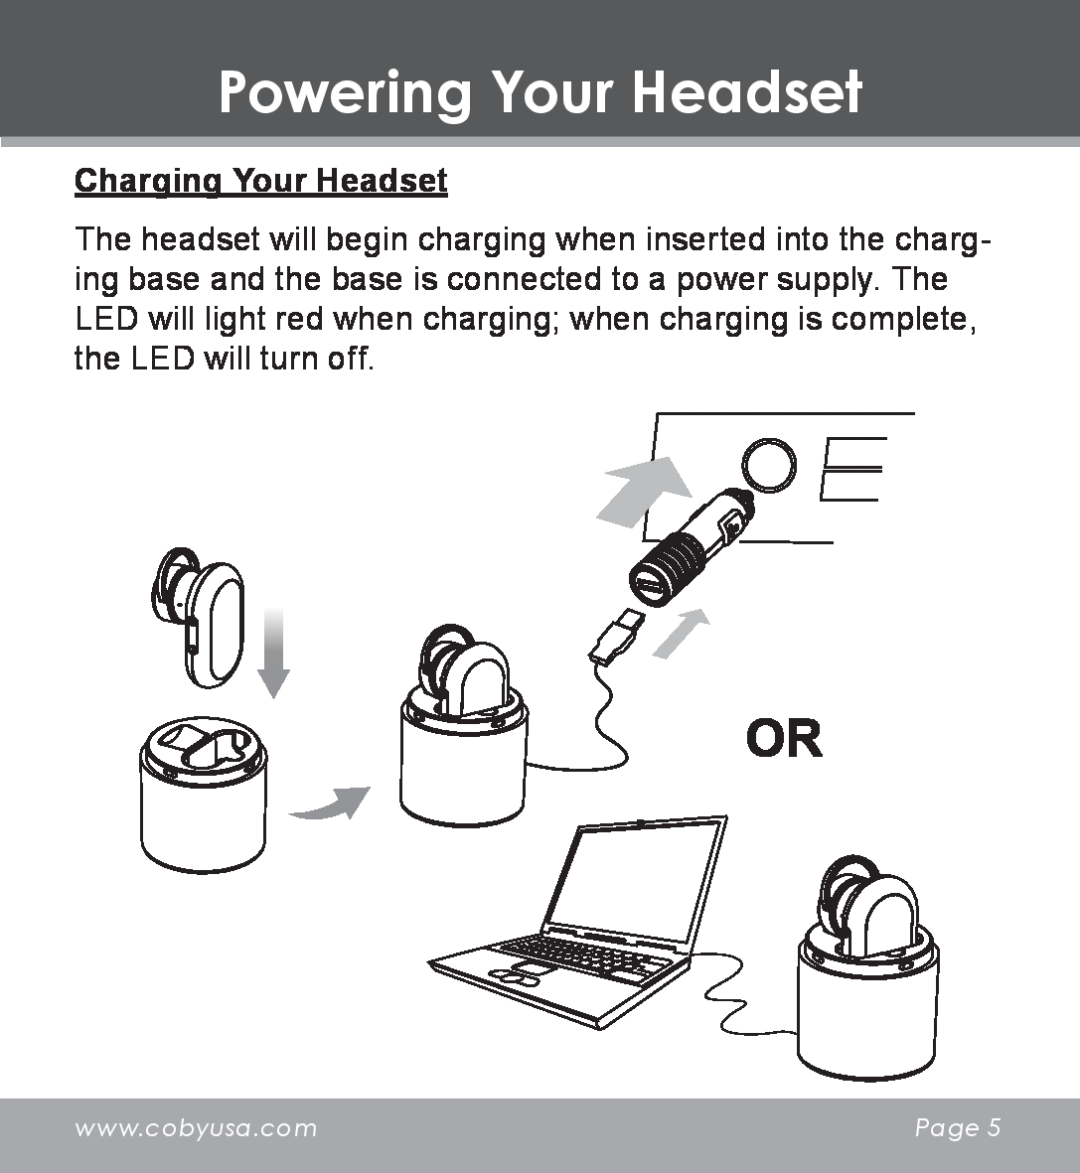 COBY electronic CV-M225 instruction manual Powering Your Headset, Charging Your Headset, Page  